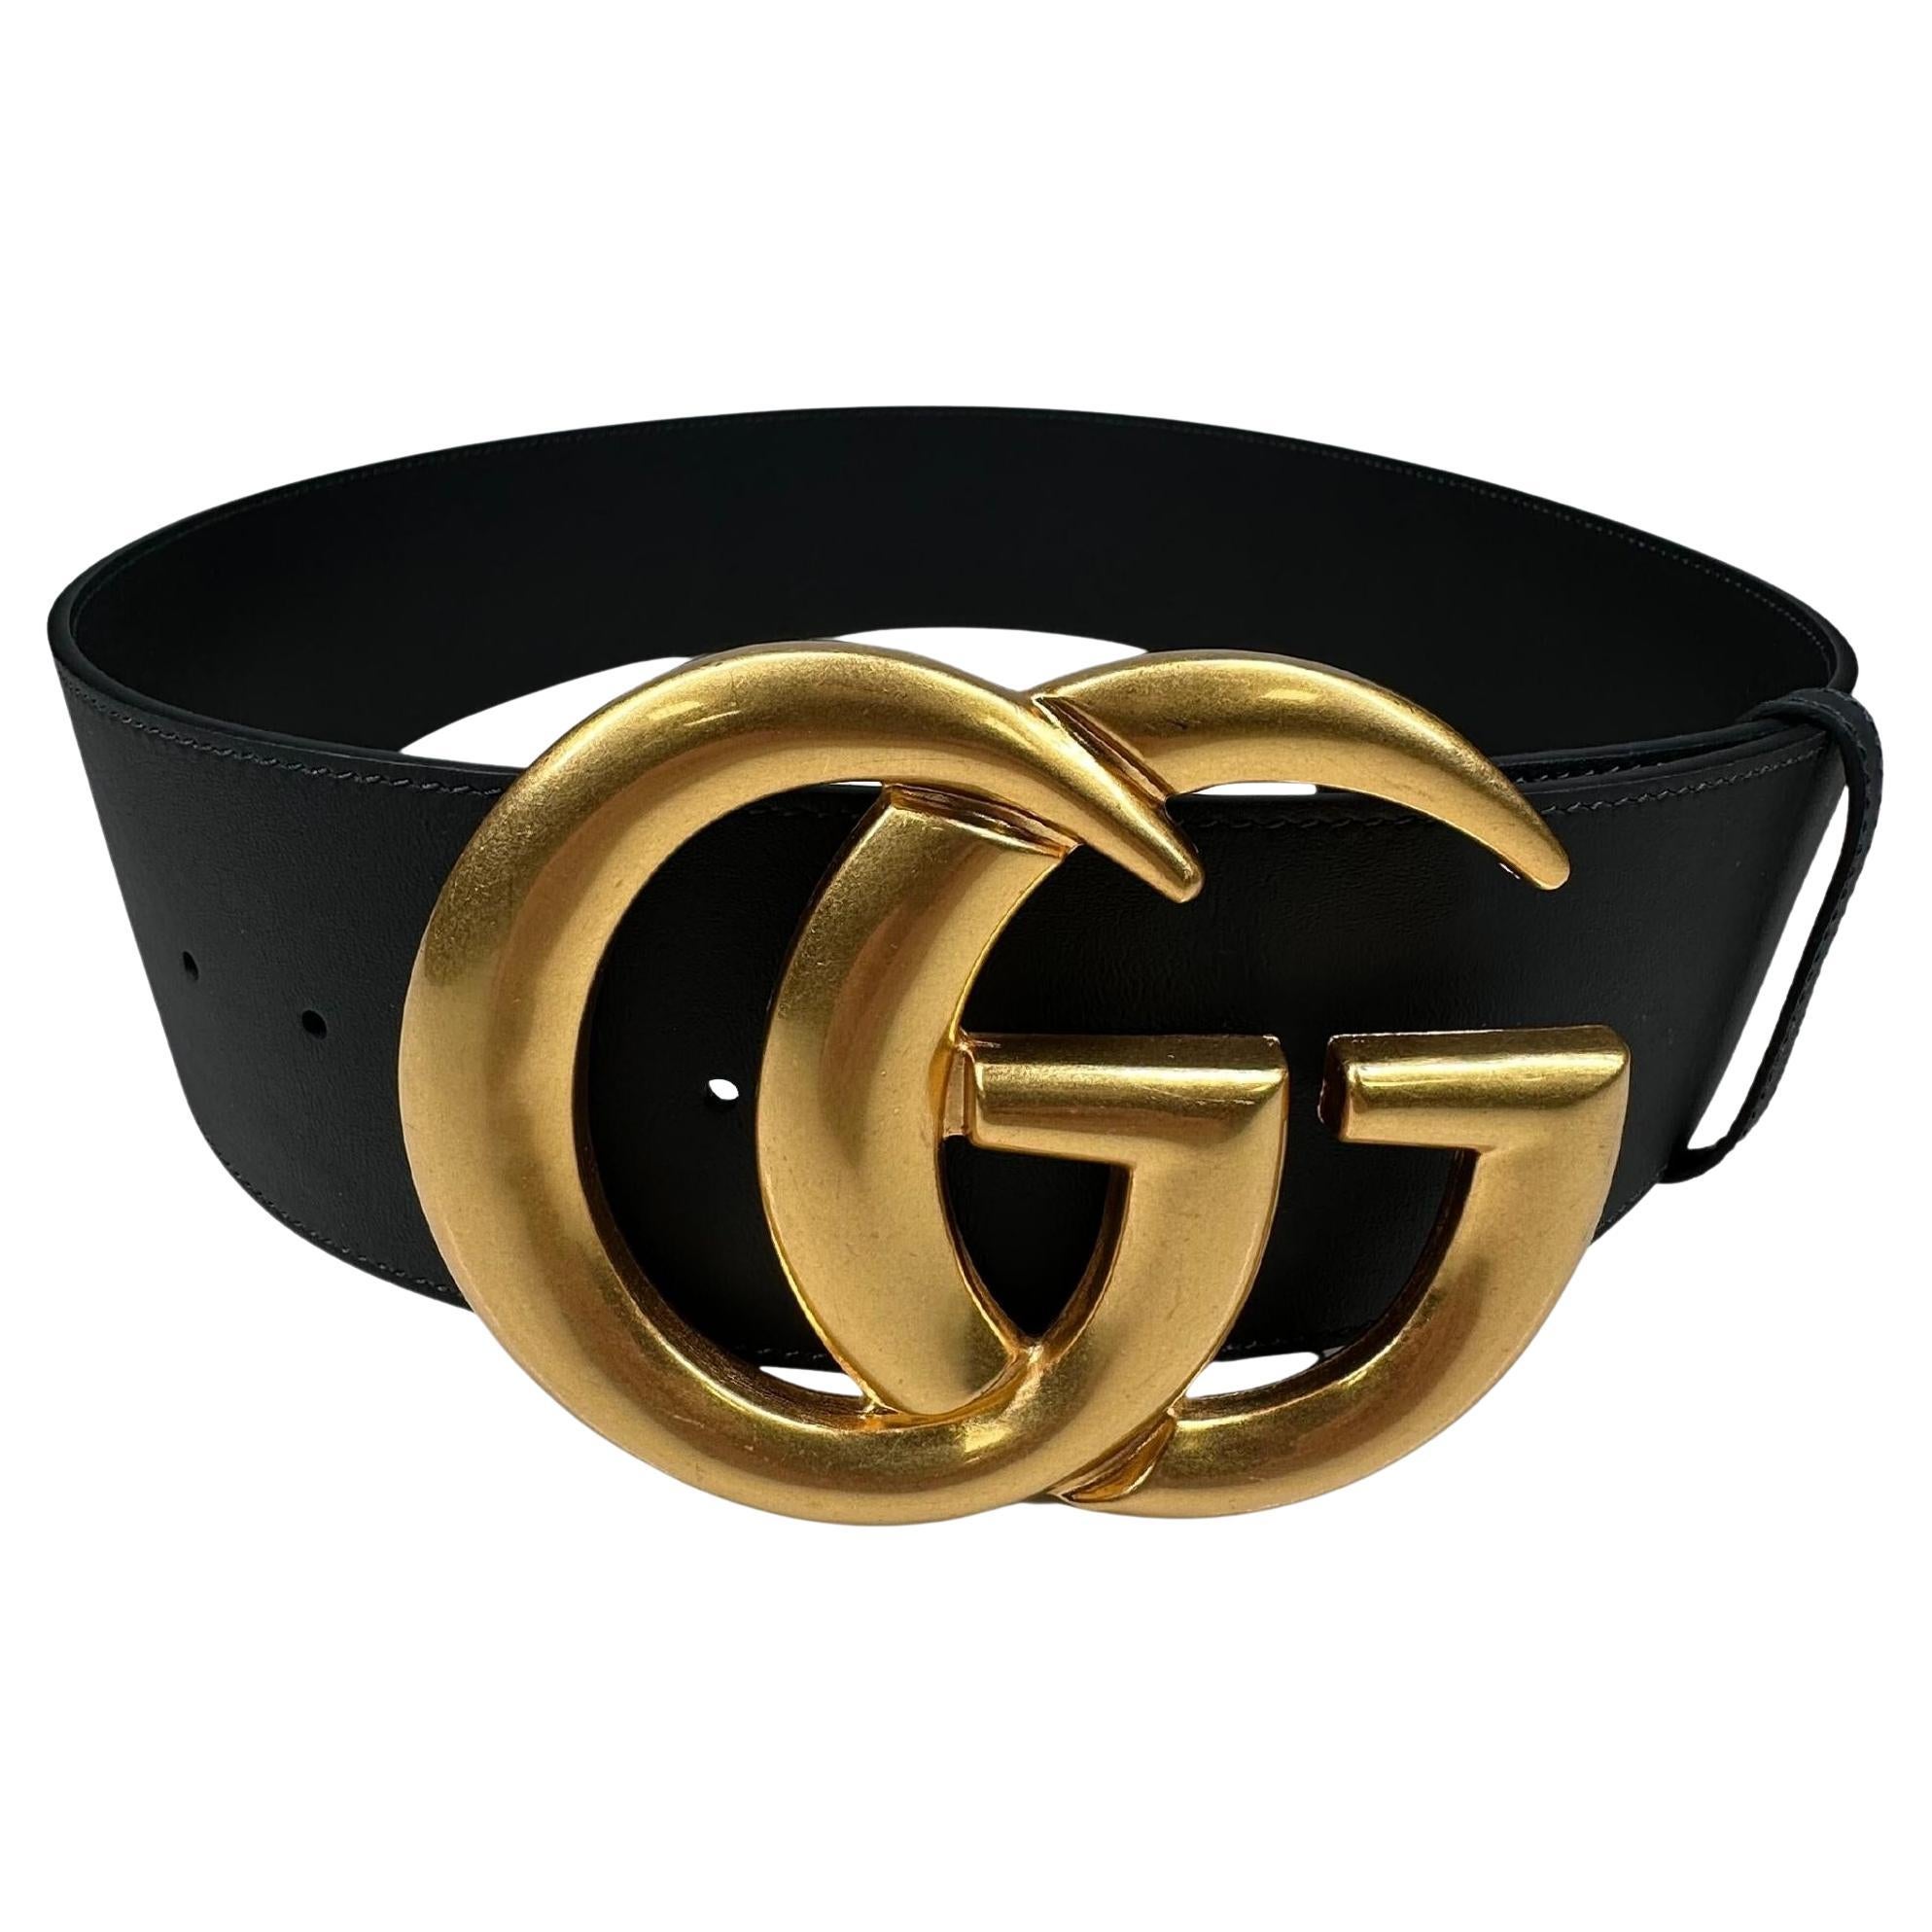 This stylish belt is made of black calfskin leather and features an interlocking GG buckle in antique brass.

Color: Black
Material: Calfskin leather
Item Code: 453265
Size: 95
Measures: L 39” x W 3”
Comes With: Dust bag
Condition: Excellent. Was